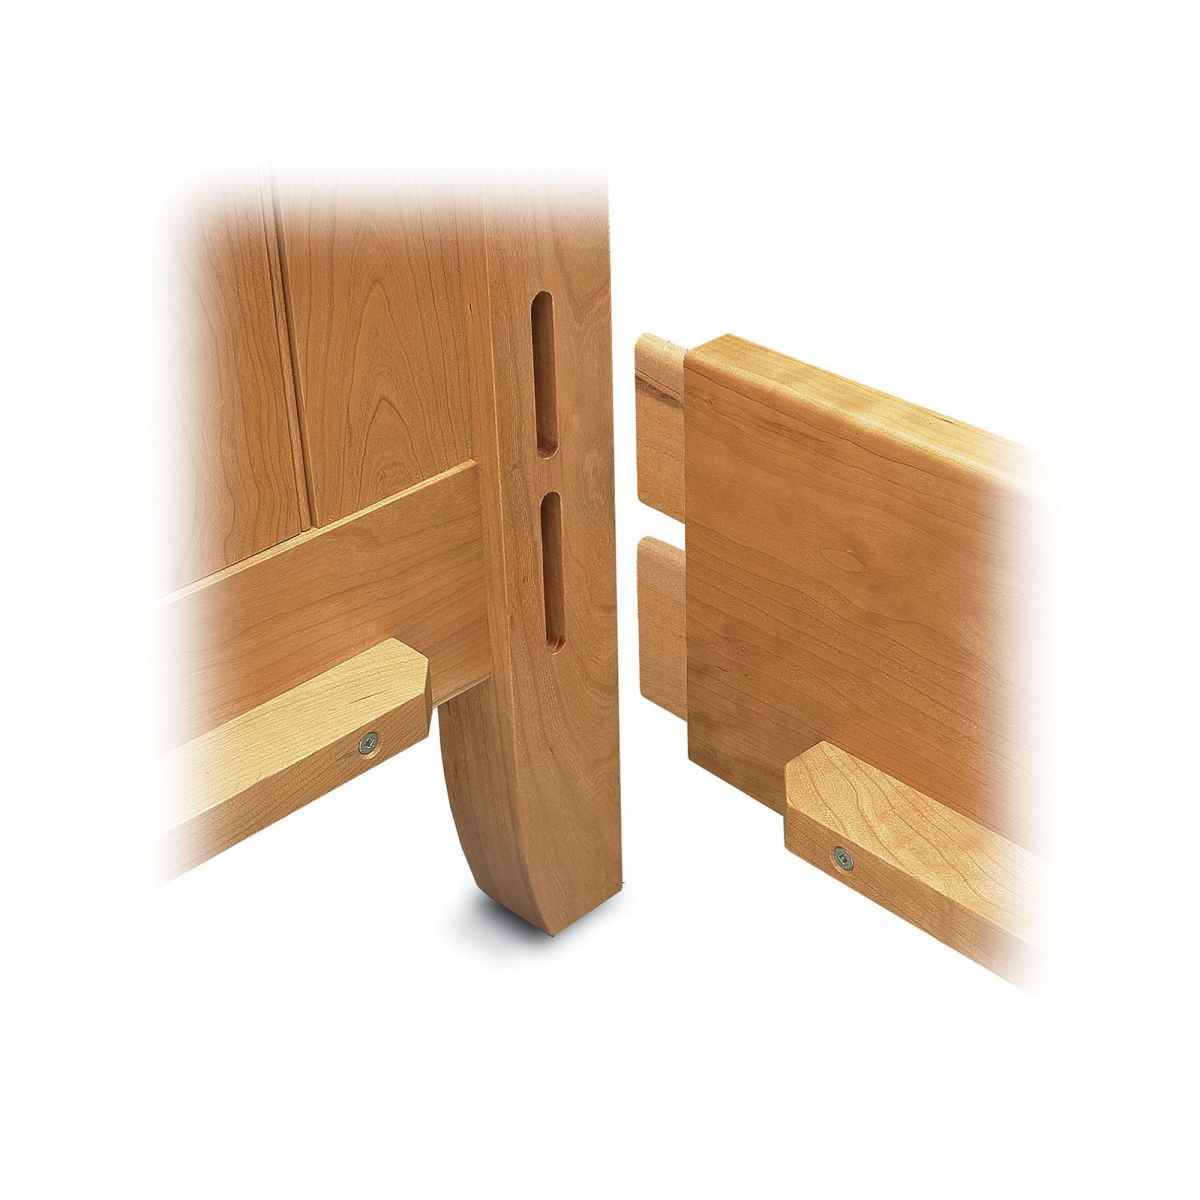 Leigh Dovetail Jigortise Tenon Jigs, Bed Frame Joints Wood